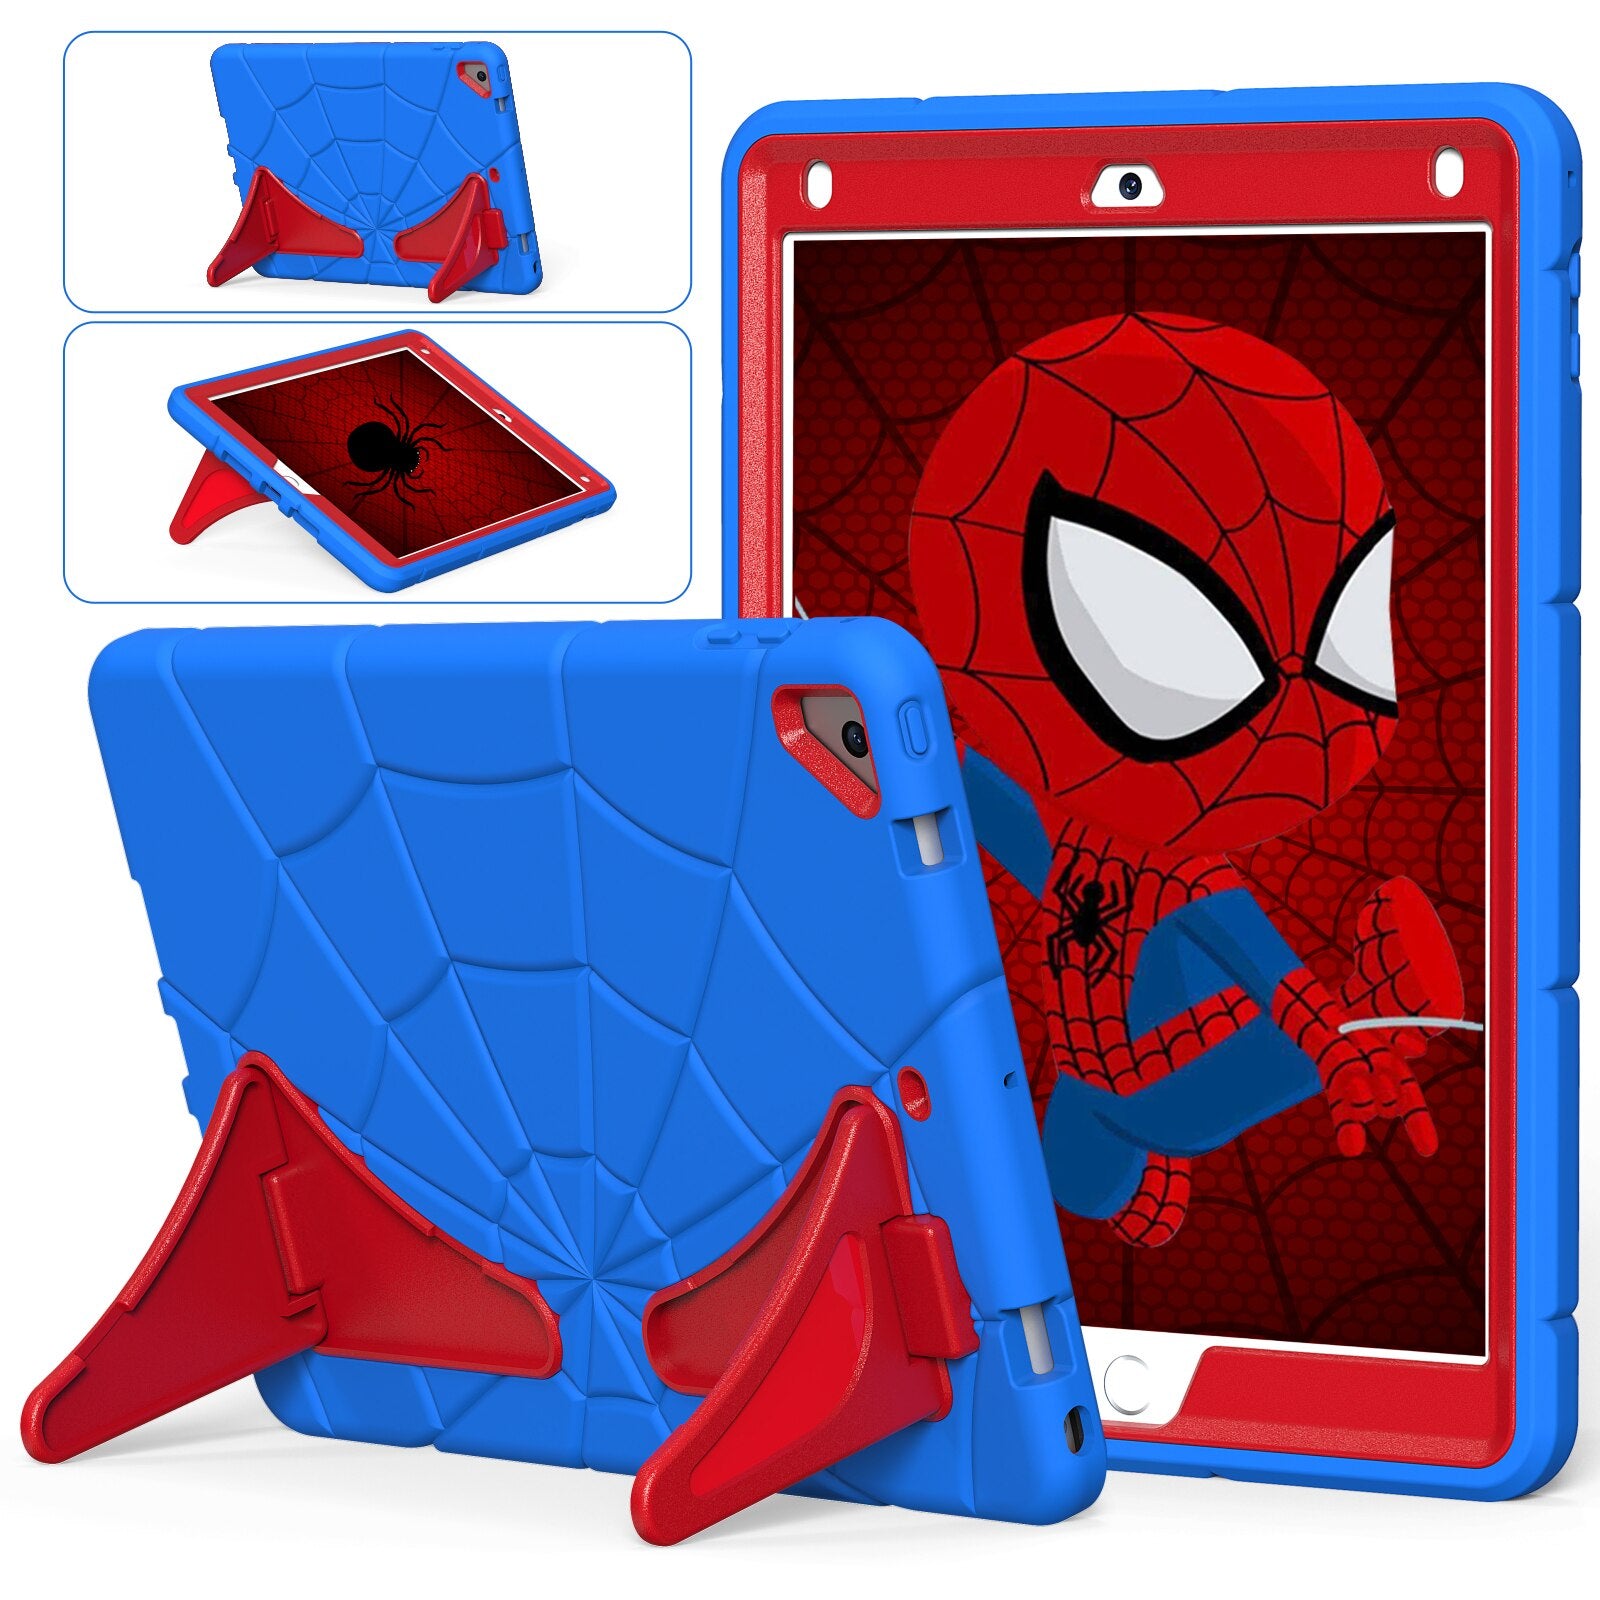 Case For iPad Pro 9.7 Smart Case for iPad Air 2 Shockproof Cover for iPad 7/8 9 10.2&#39;&#39; Protective Shell for ipad 5/6 9.7&#39;&#39; - 0 Blue Red / United States / iPad 10.2 7th Find Epic Store